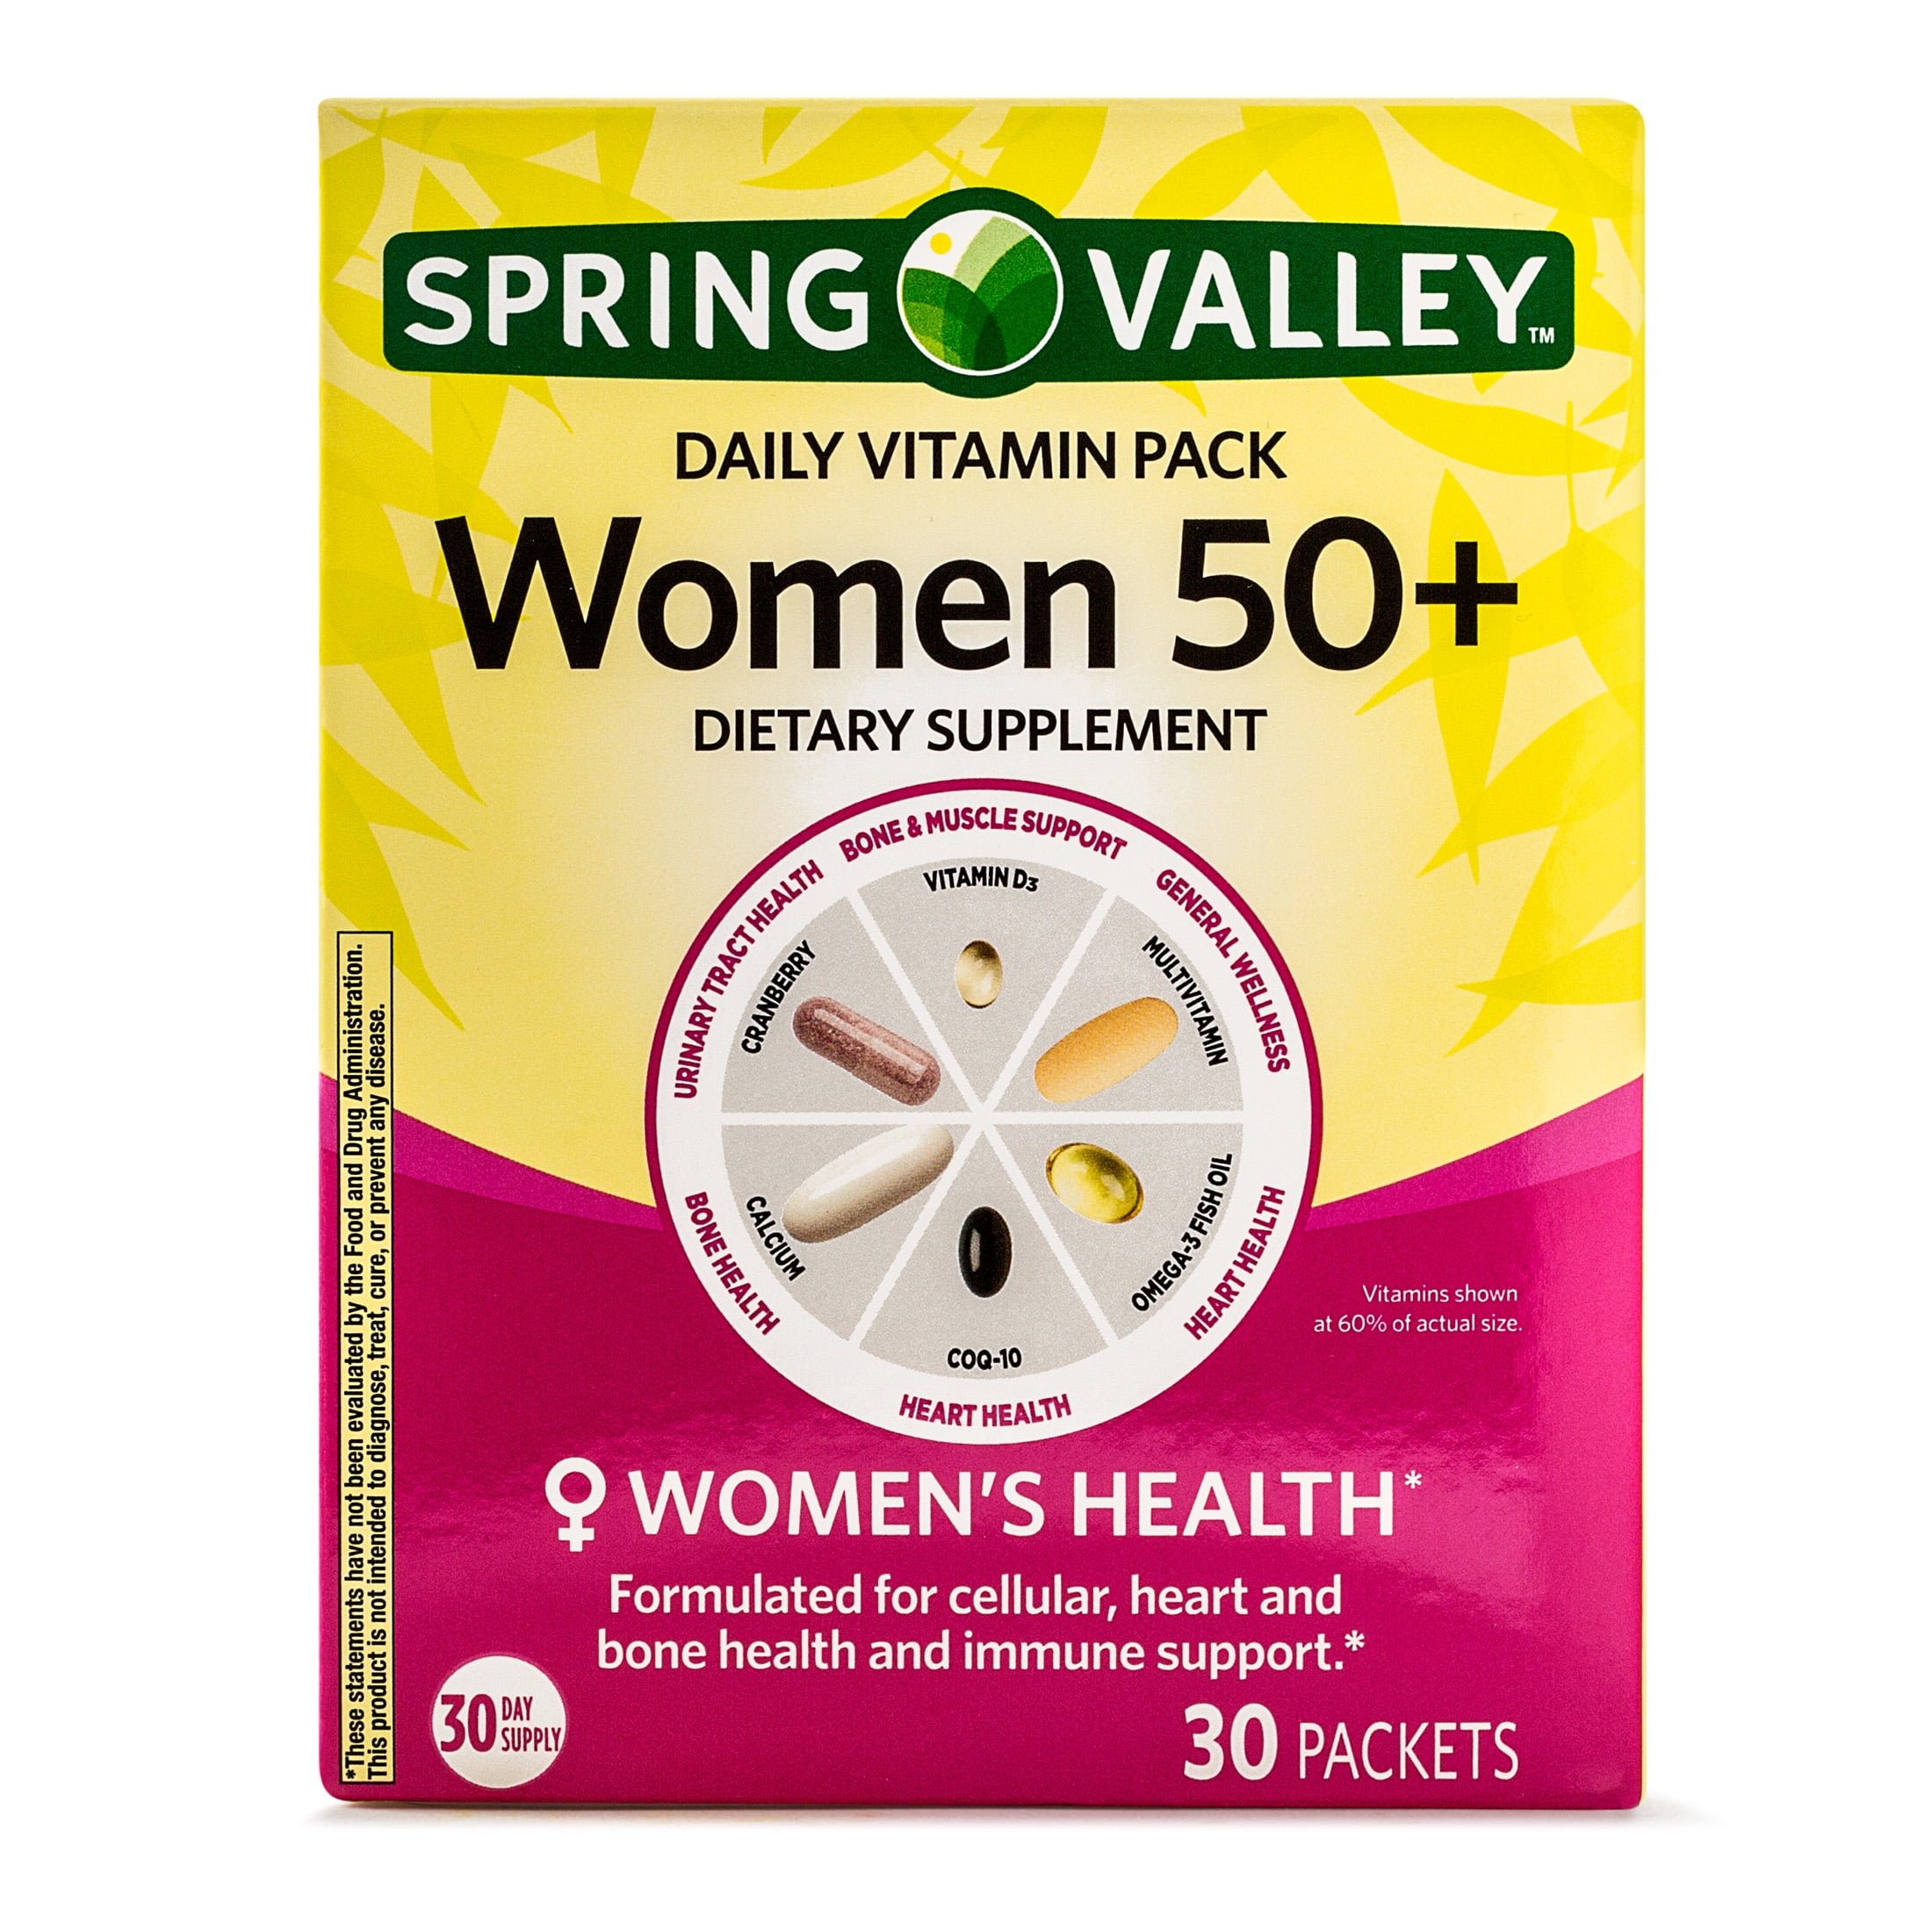 spring-valley-women-50-daily-vitamin-and-mineral-supplement-packs-30